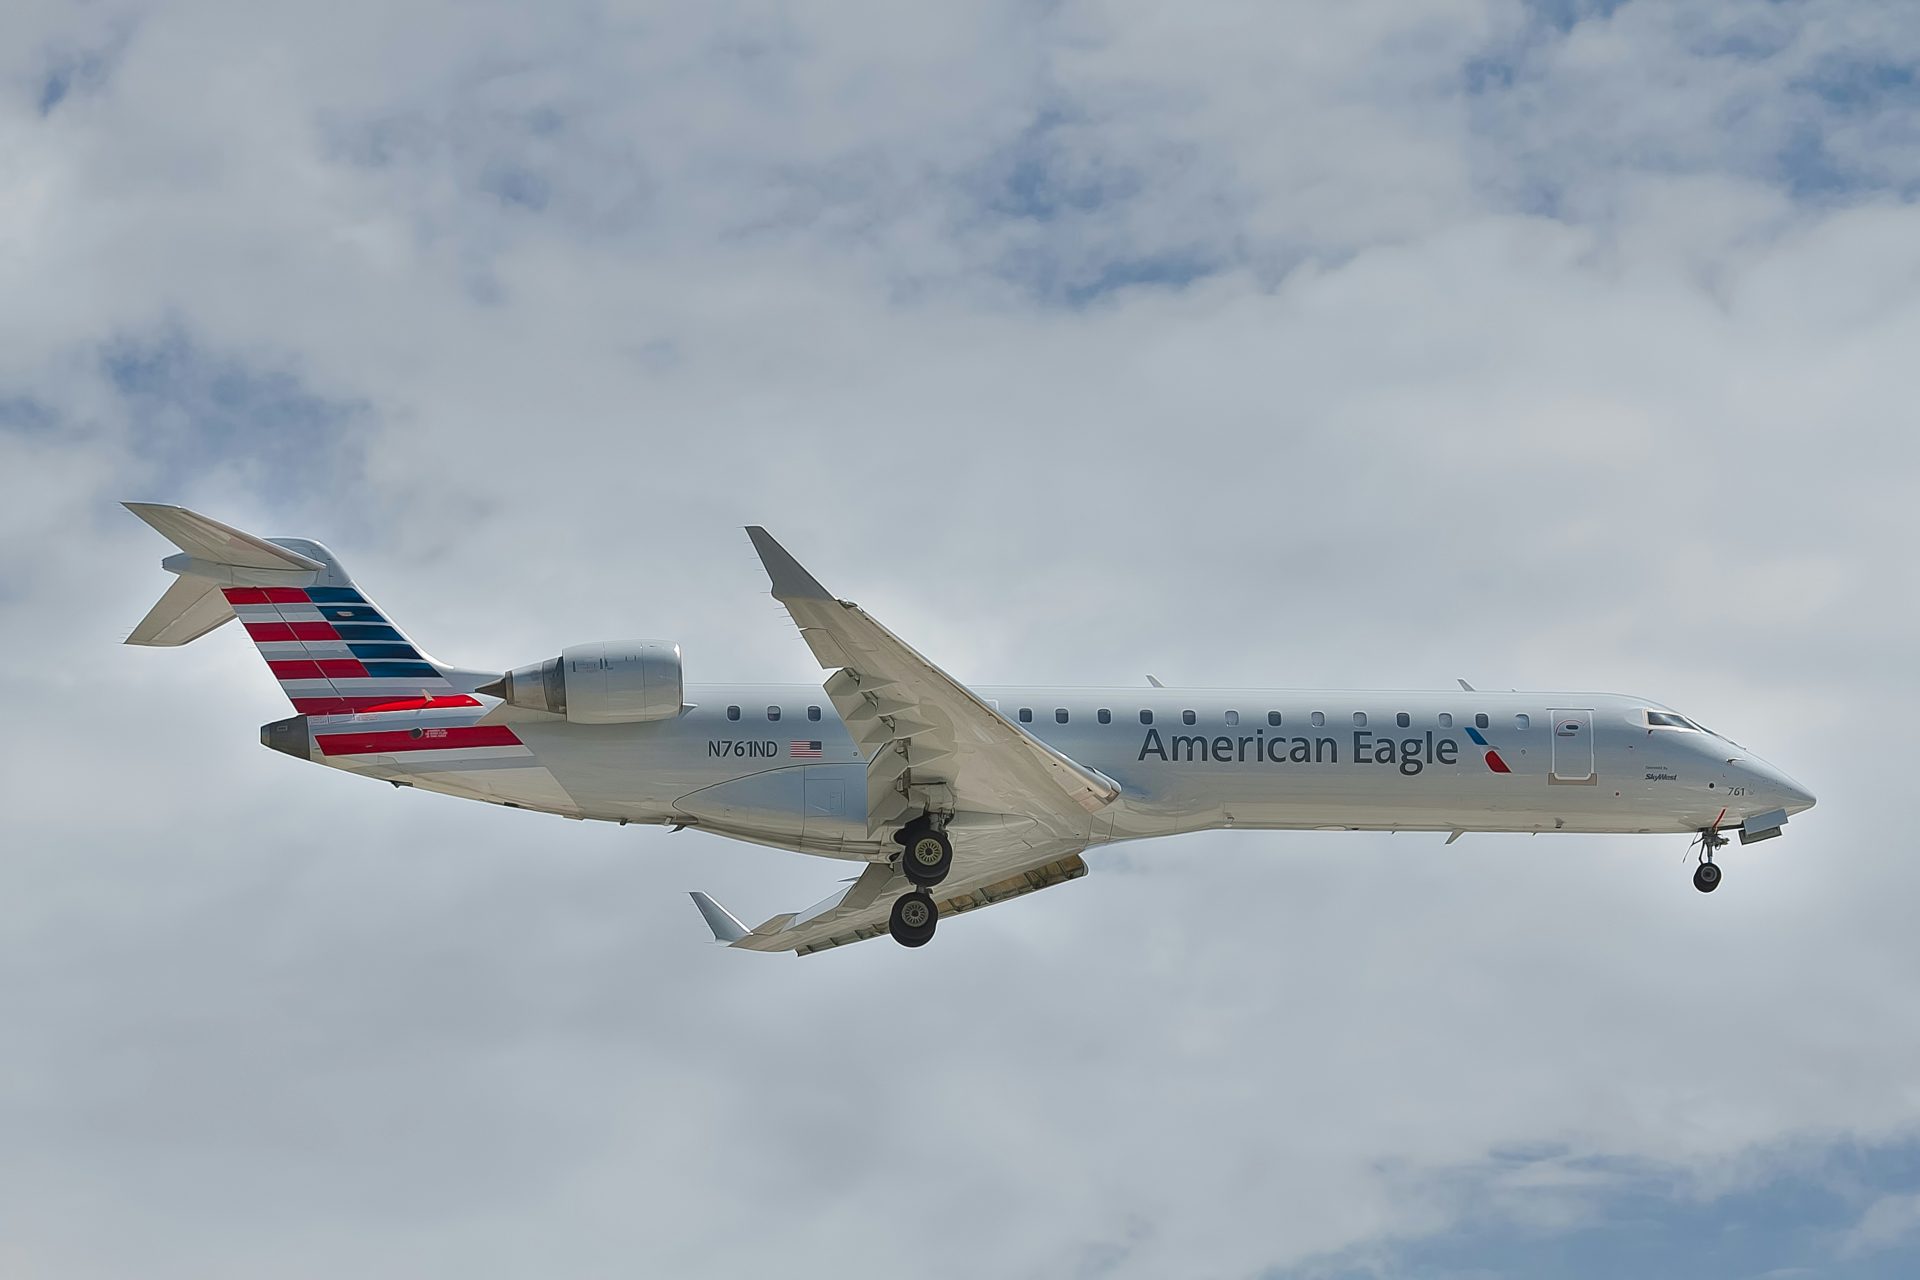 10. American Eagle (American Airlines subsidiary) 